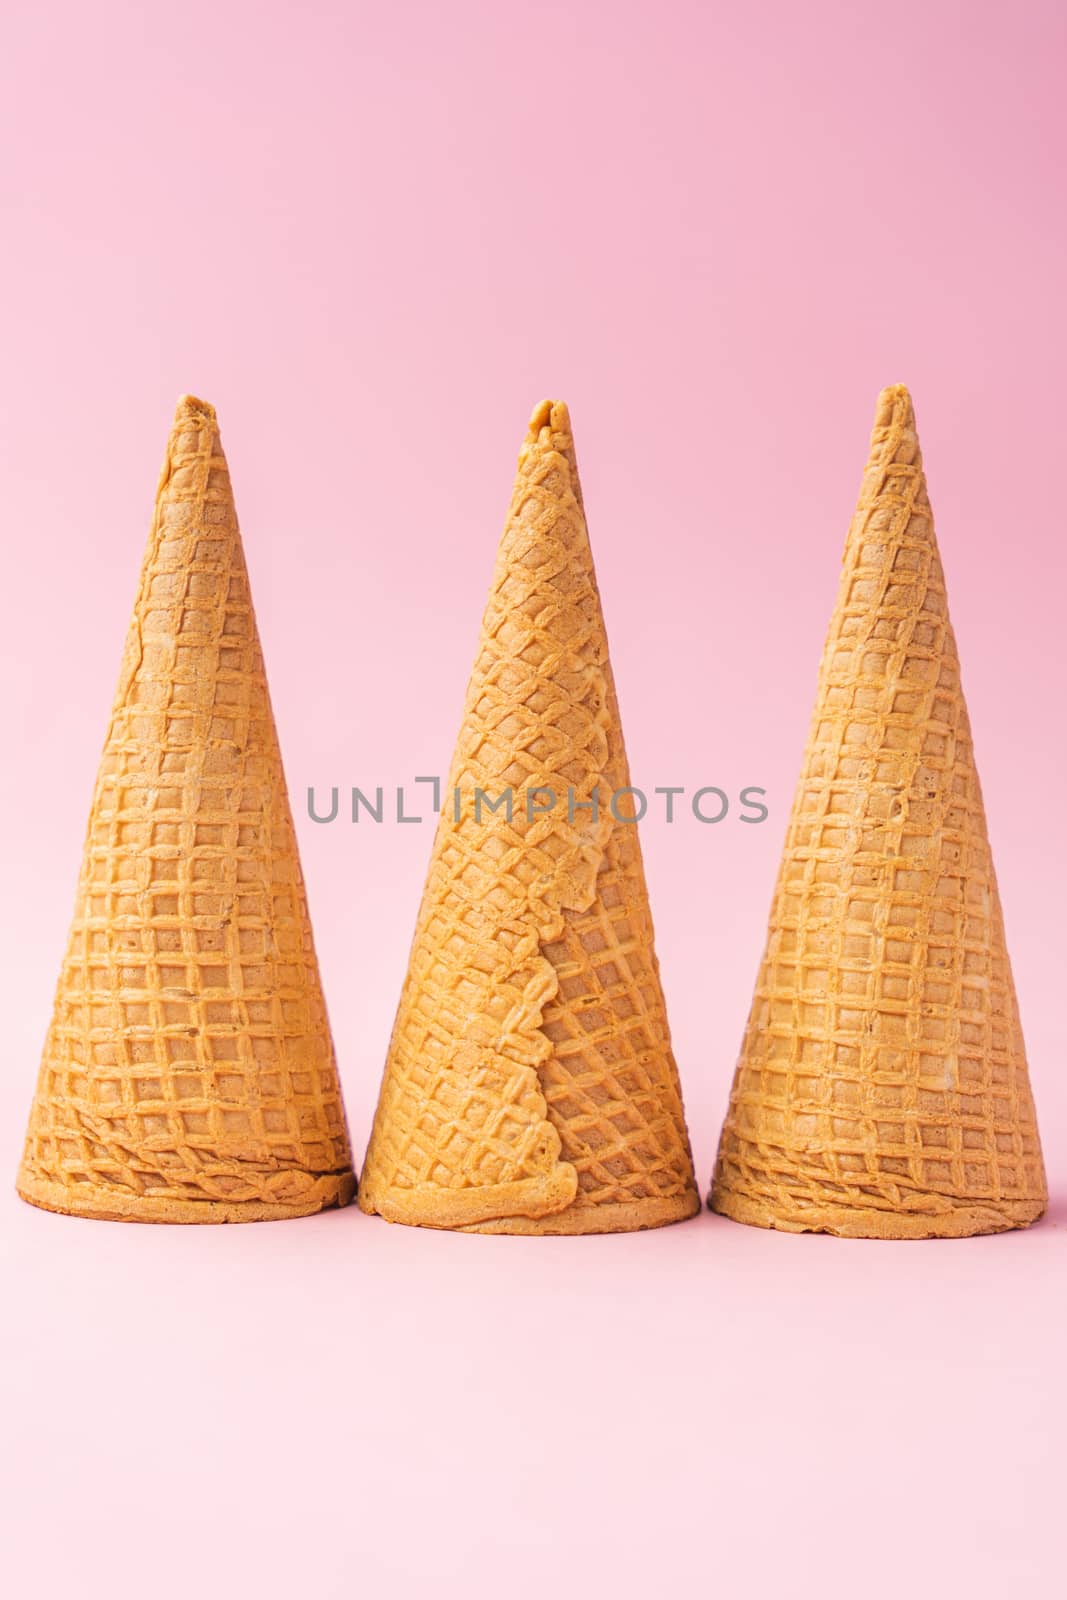 Three upside down wheat flour ice cream cones lined up towards the bottom on a pink background. Summer concept